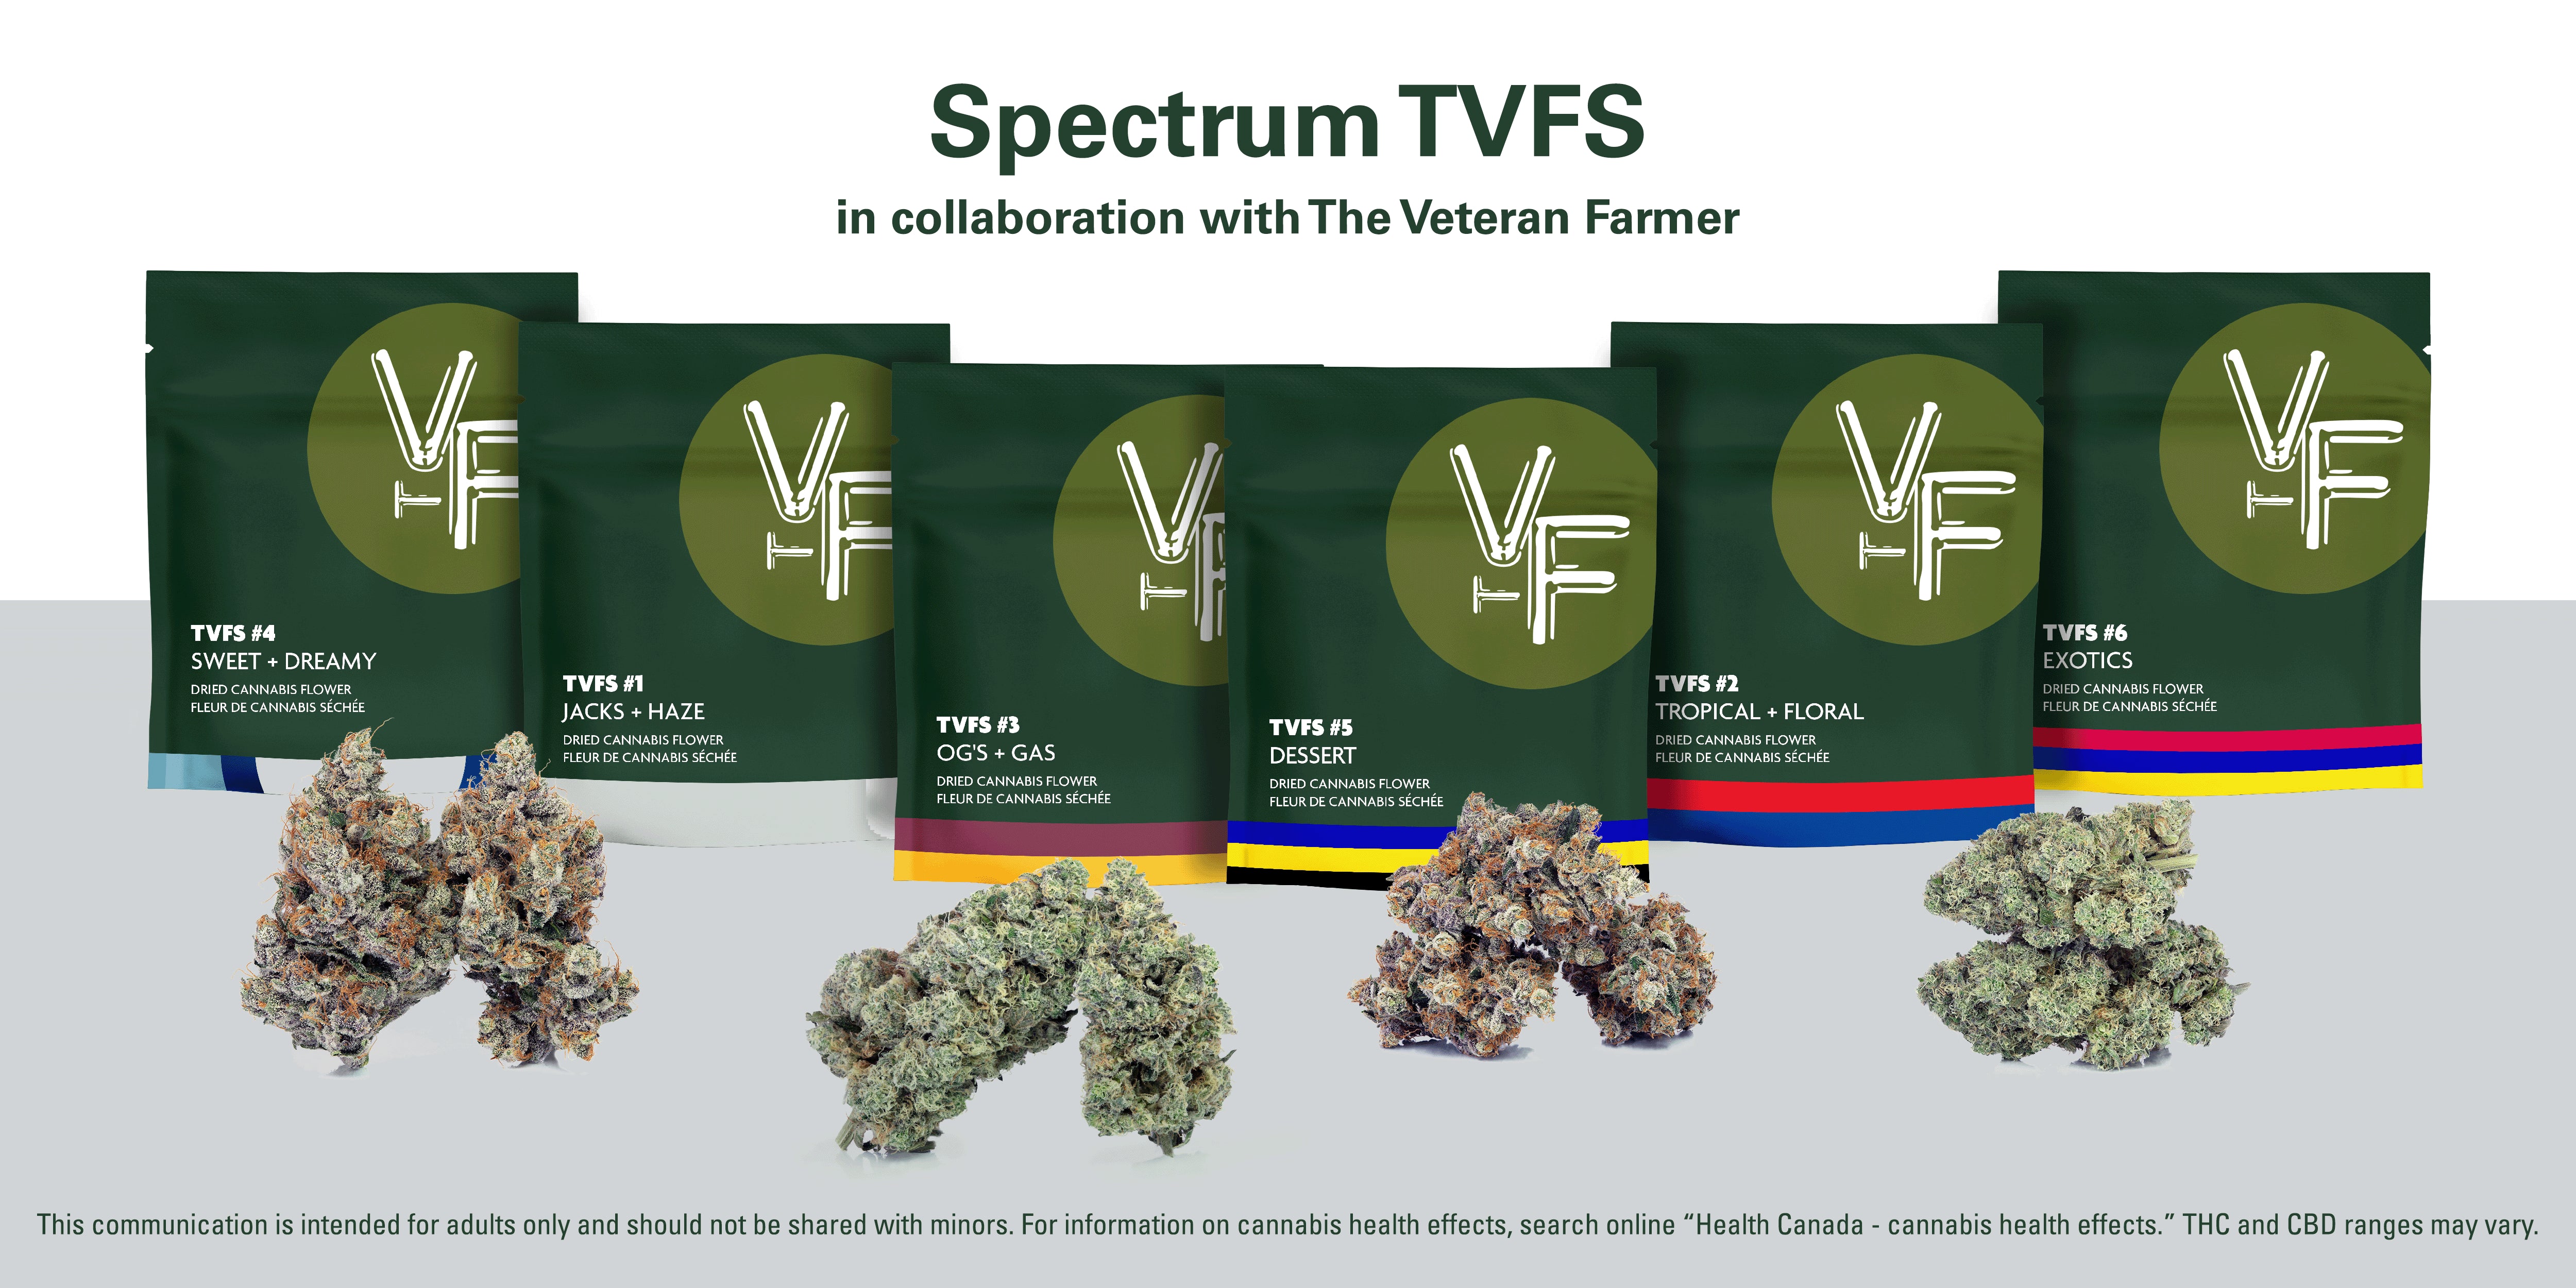 Introducing Spectrum TVFS – Curated for Veterans by Veterans